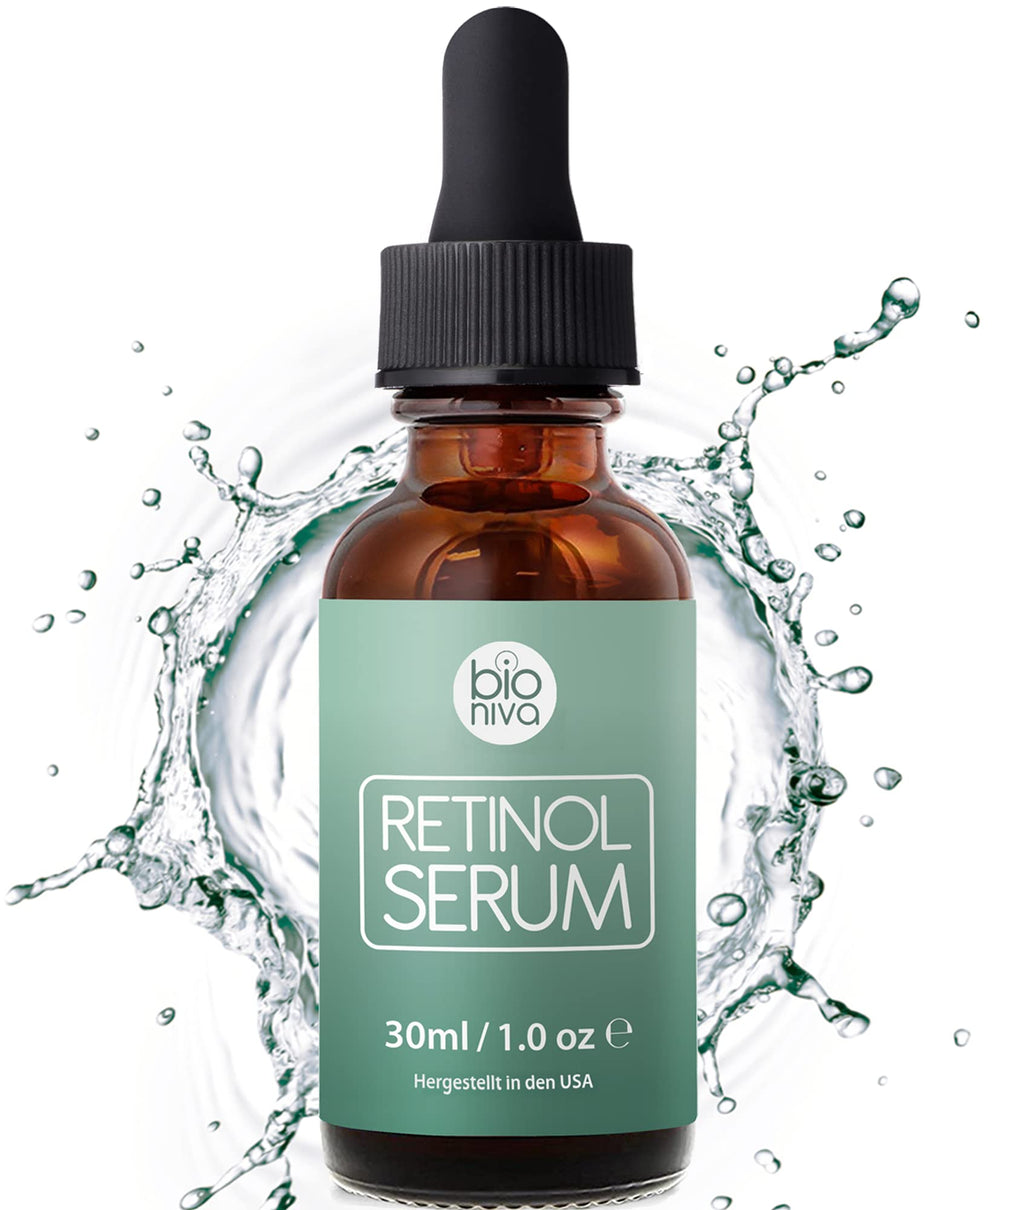 [Australia] - Retinol Serum - Retinol Liposome Delivery System with Vitamin C, Aloe, and Vegan Hyaluronic Acid - High Strength Anti Aging Serum for face, d√©collet√© and body from Bioniva 30ml 